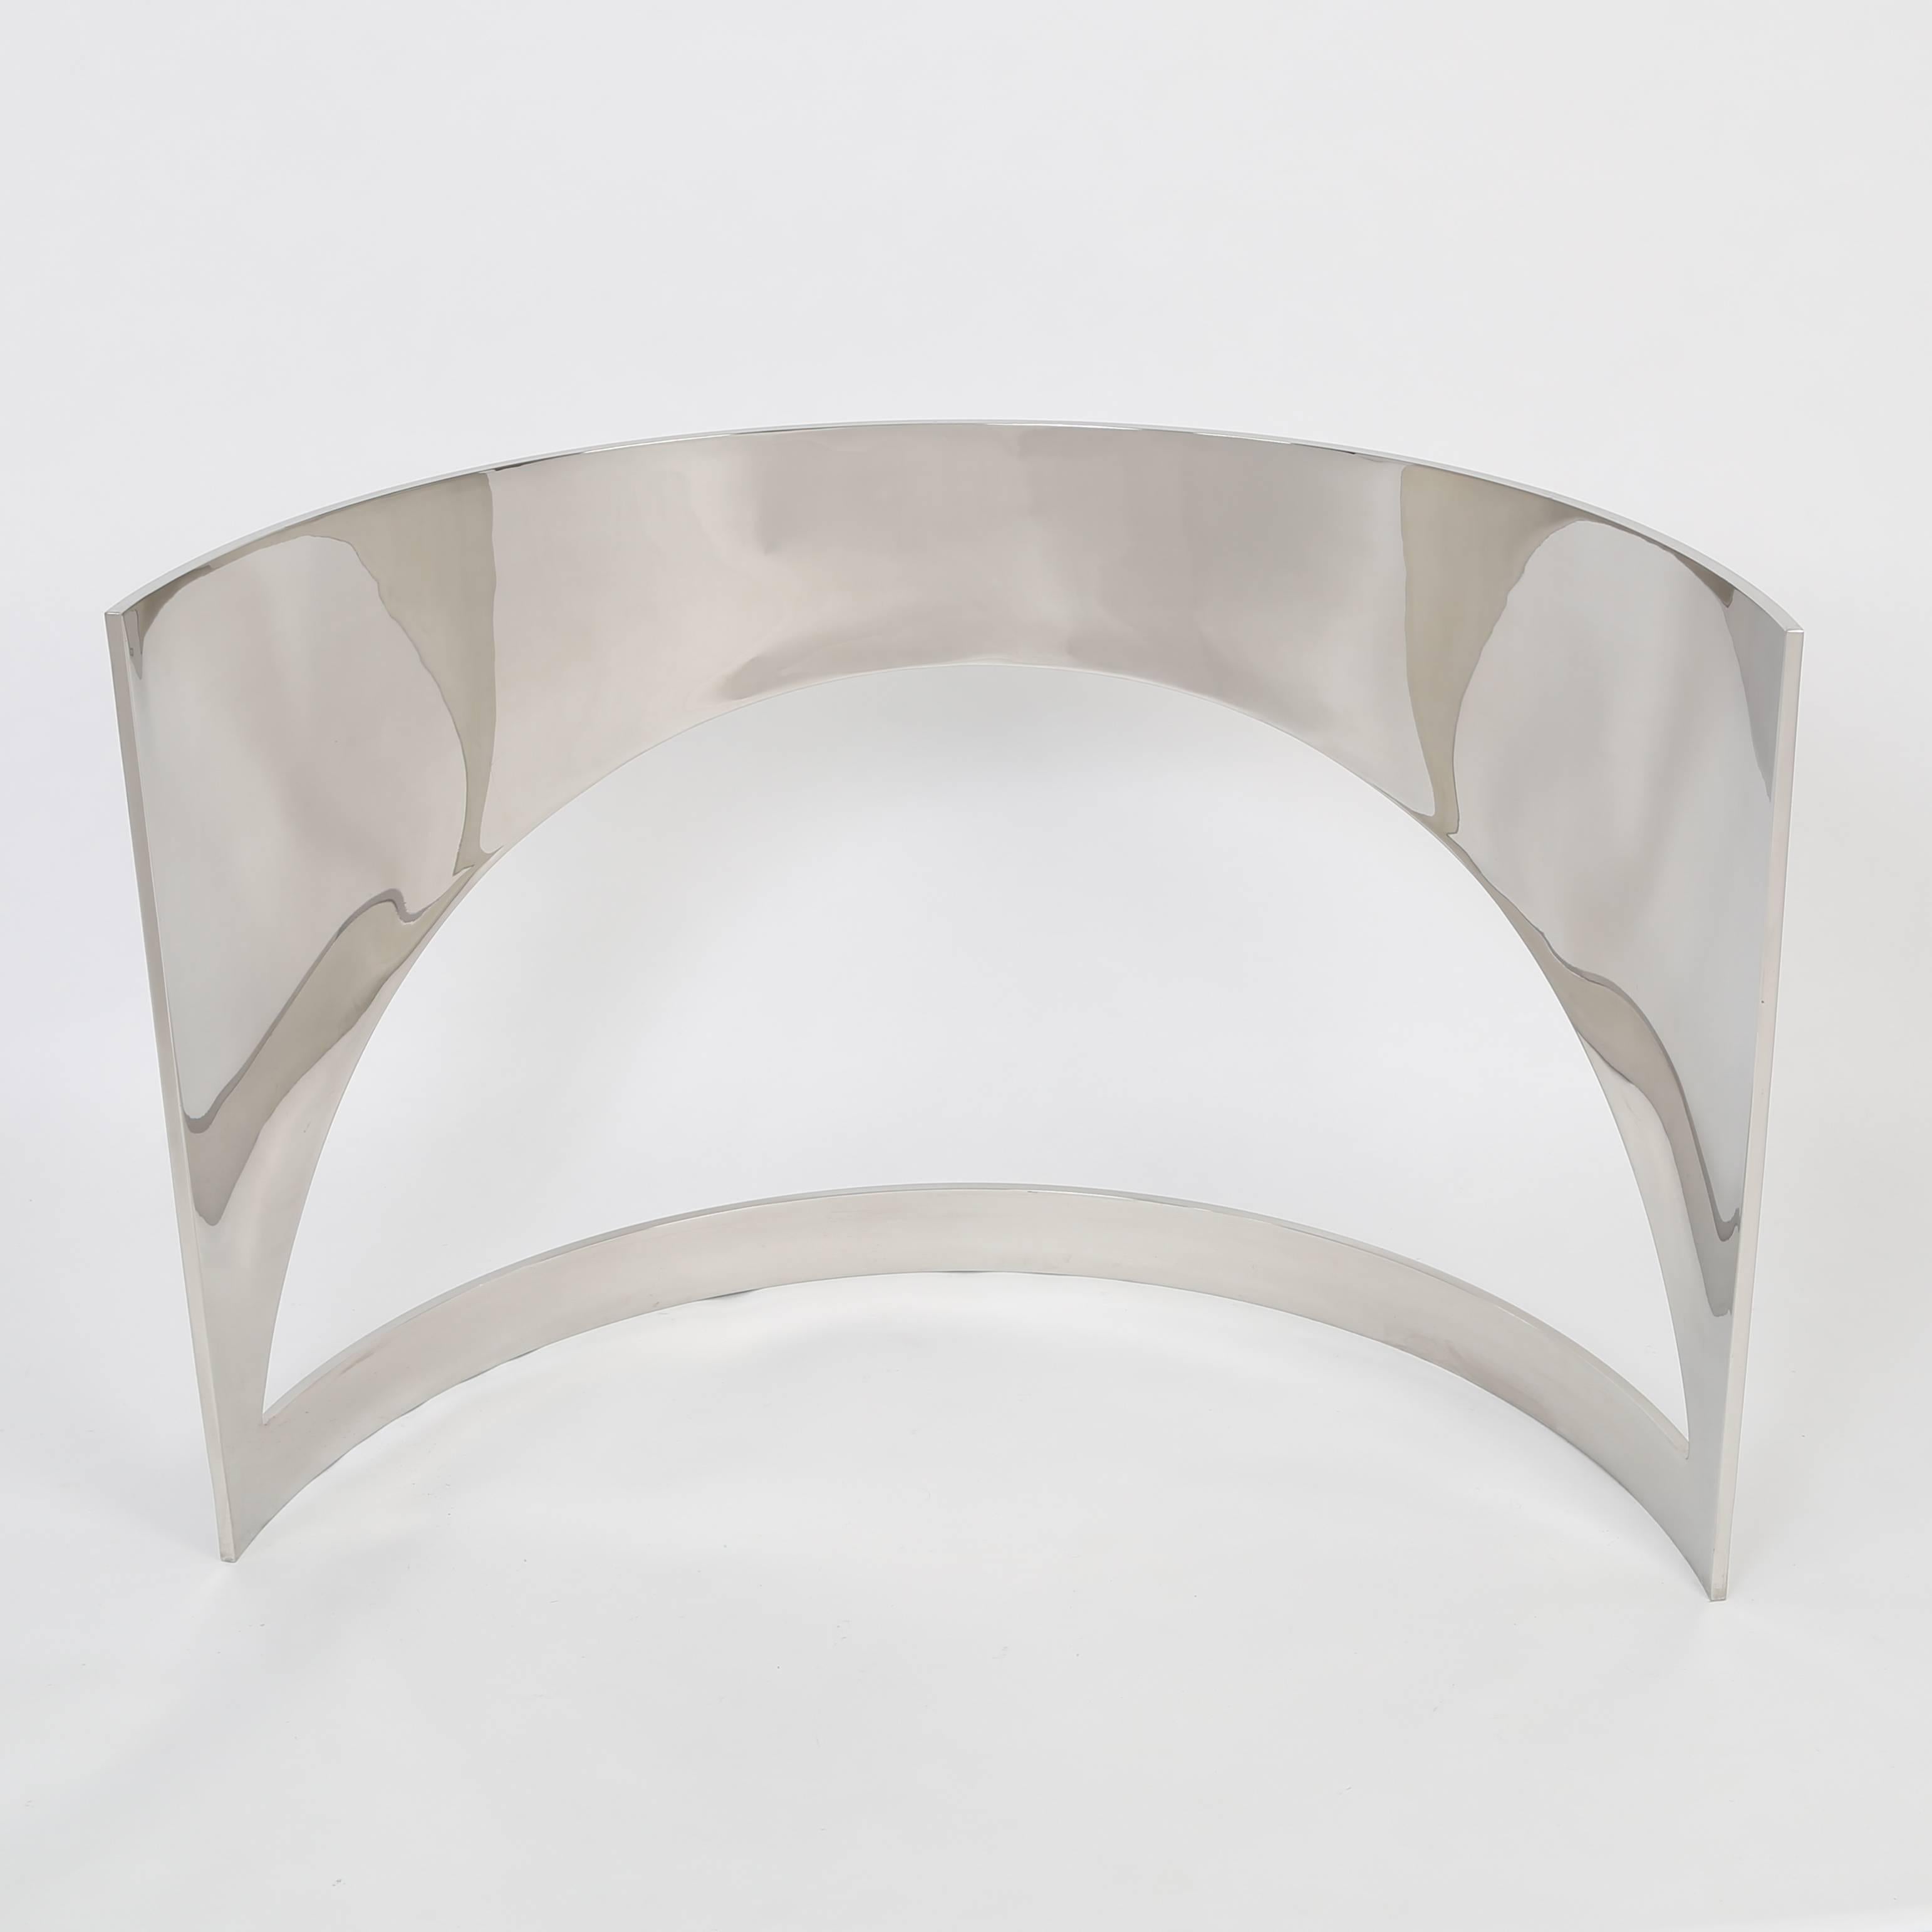 Pair of Polished Steel Demilune Table Bases by Paul M. Jones, circa 1960s 2